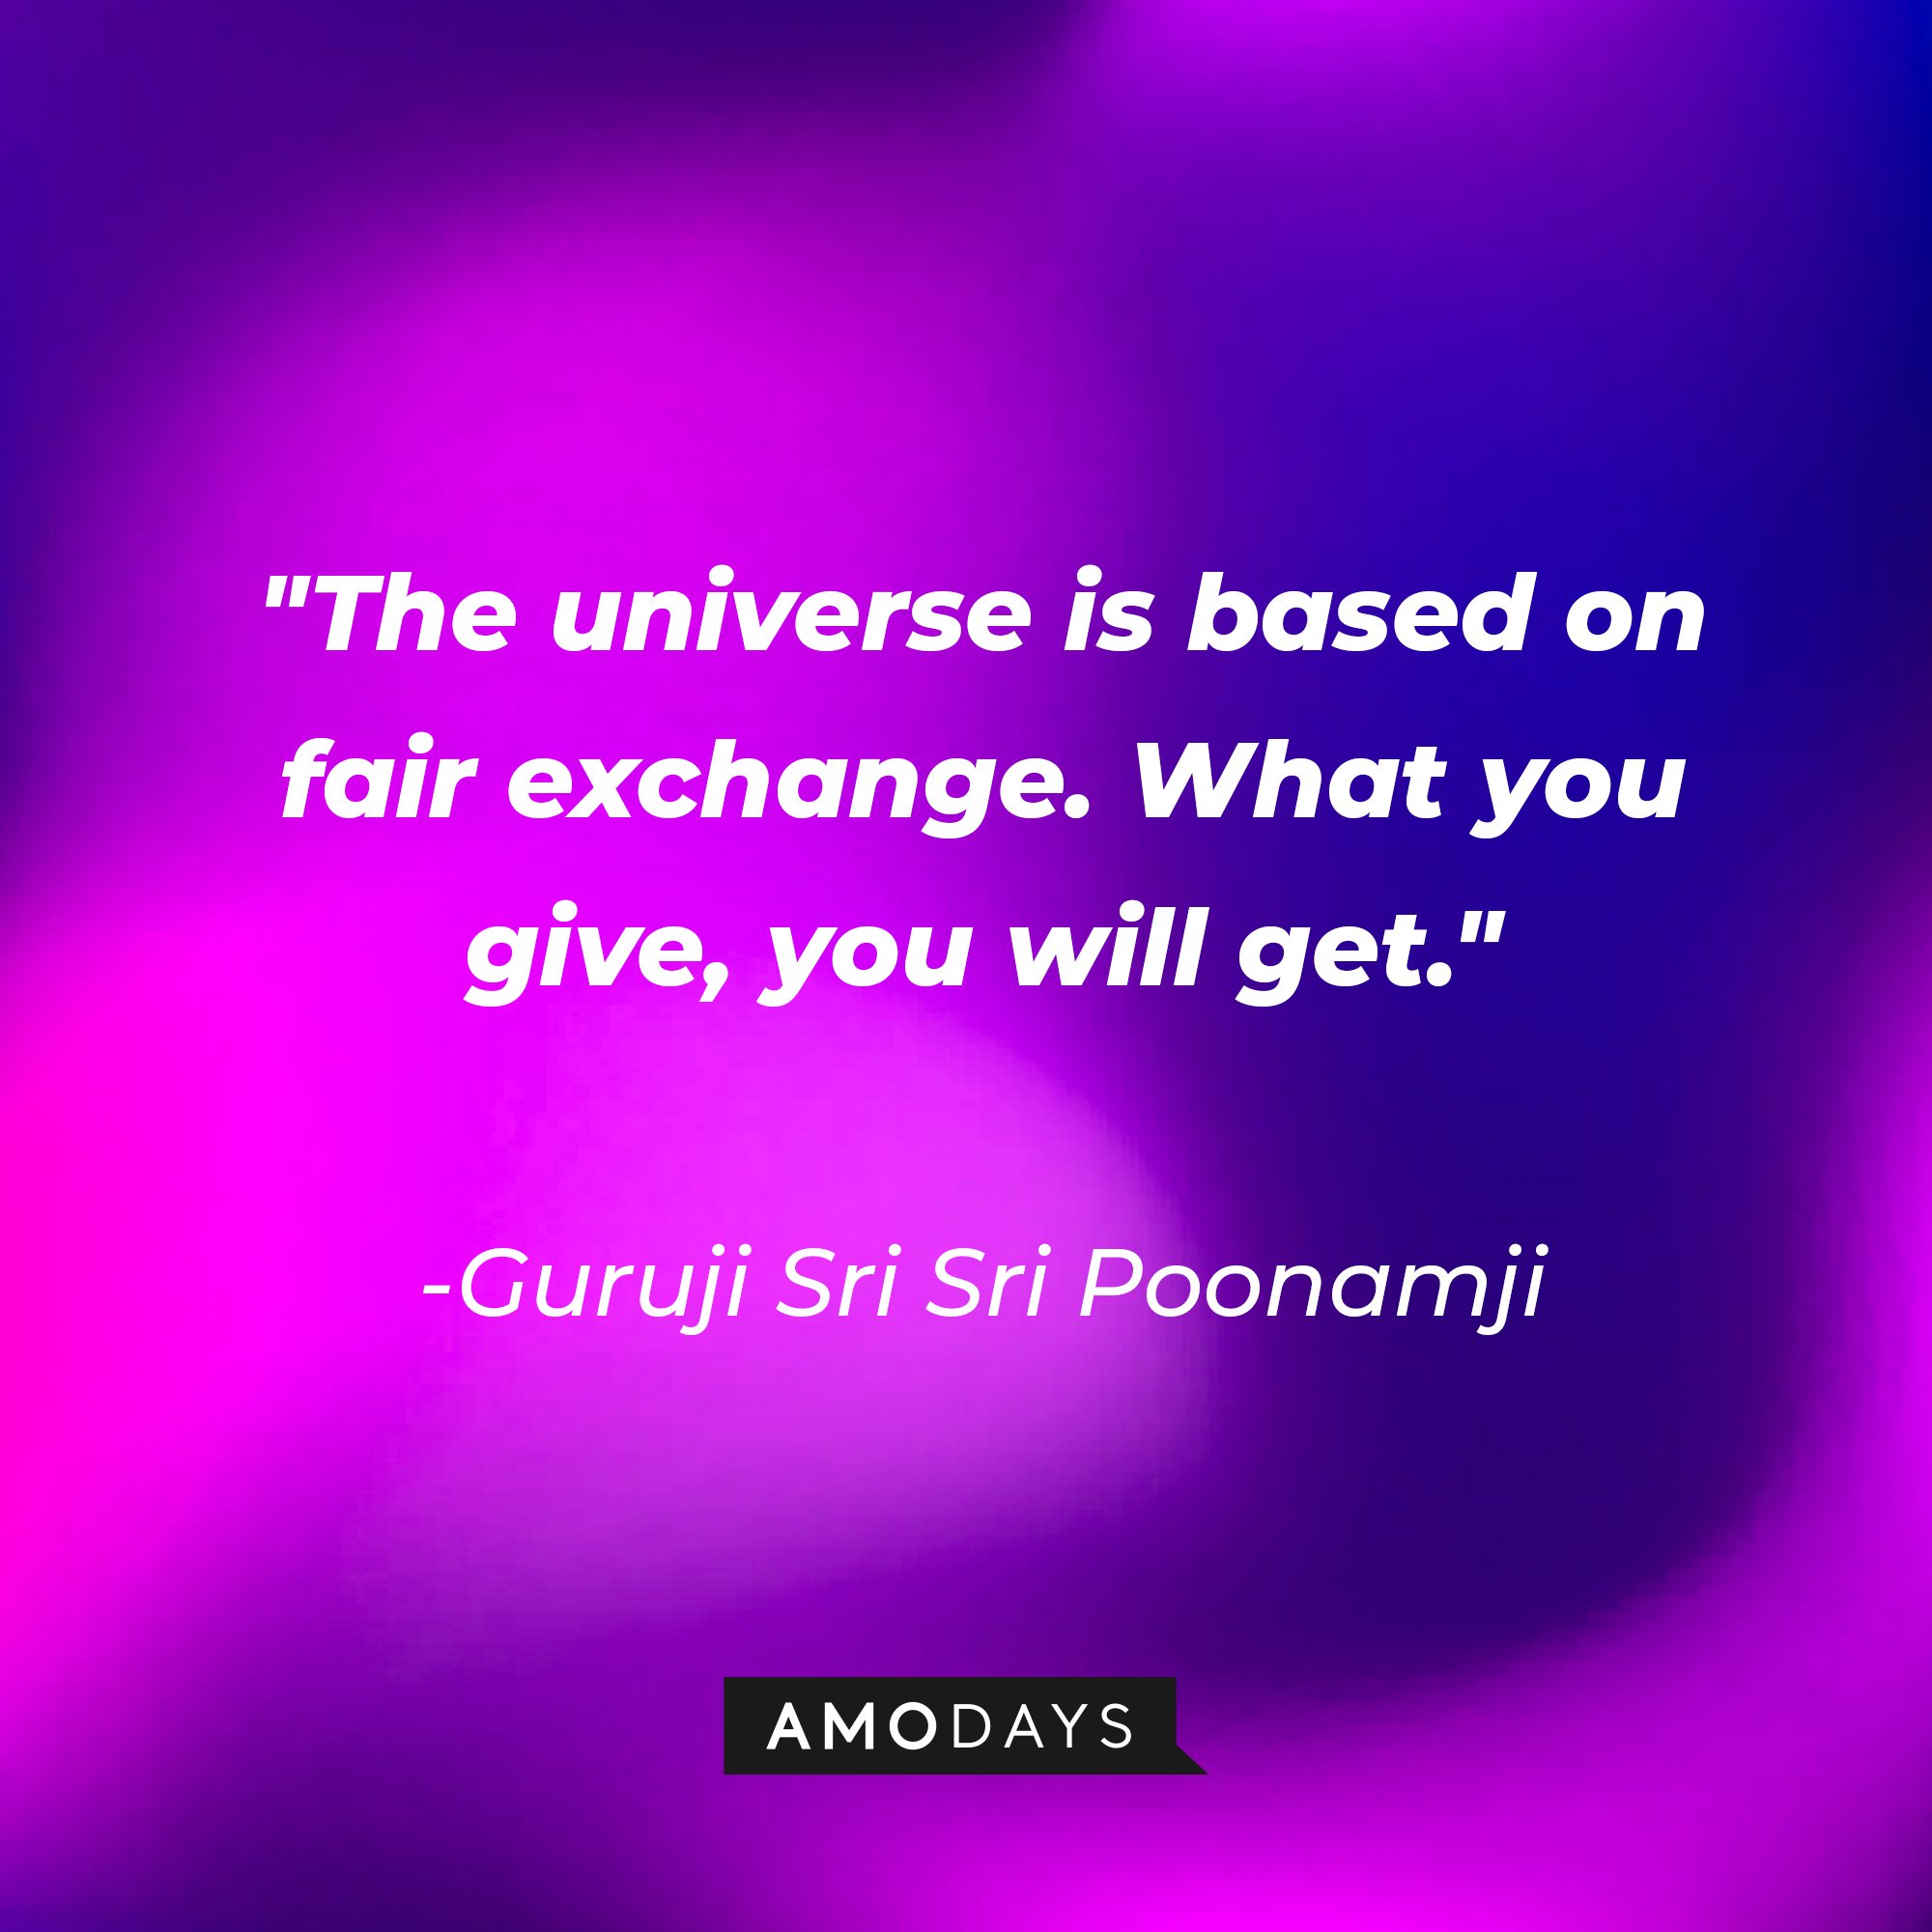 Guruji Sri Sri Poonamji’s quote: "The universe is based on fair exchange. What you give, you will get." | Image: AmoDays